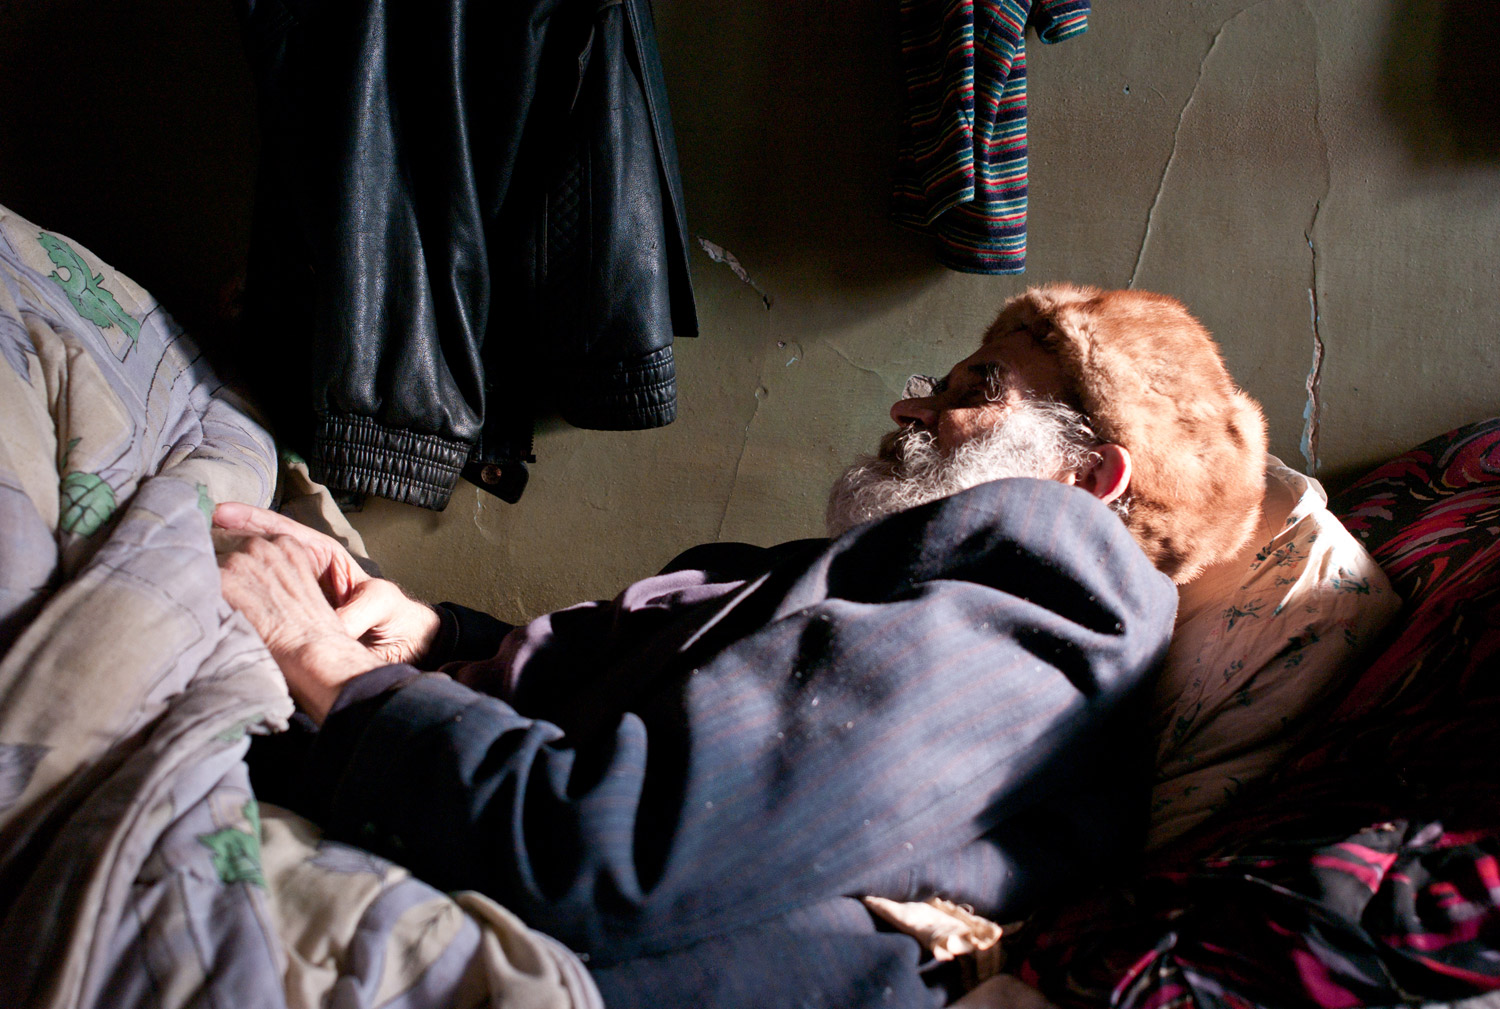 Tuberculosis also has taken root in Ukrainian prisons, where cramped quarters and poor conditions contribute to its spread. This ex-convict, now blind, suffers from extra-drug resistant TB (XDR-TB), a strain of the disease that resists most treatments. He spends most of his days lying in bed at a clinic in Donetsk.